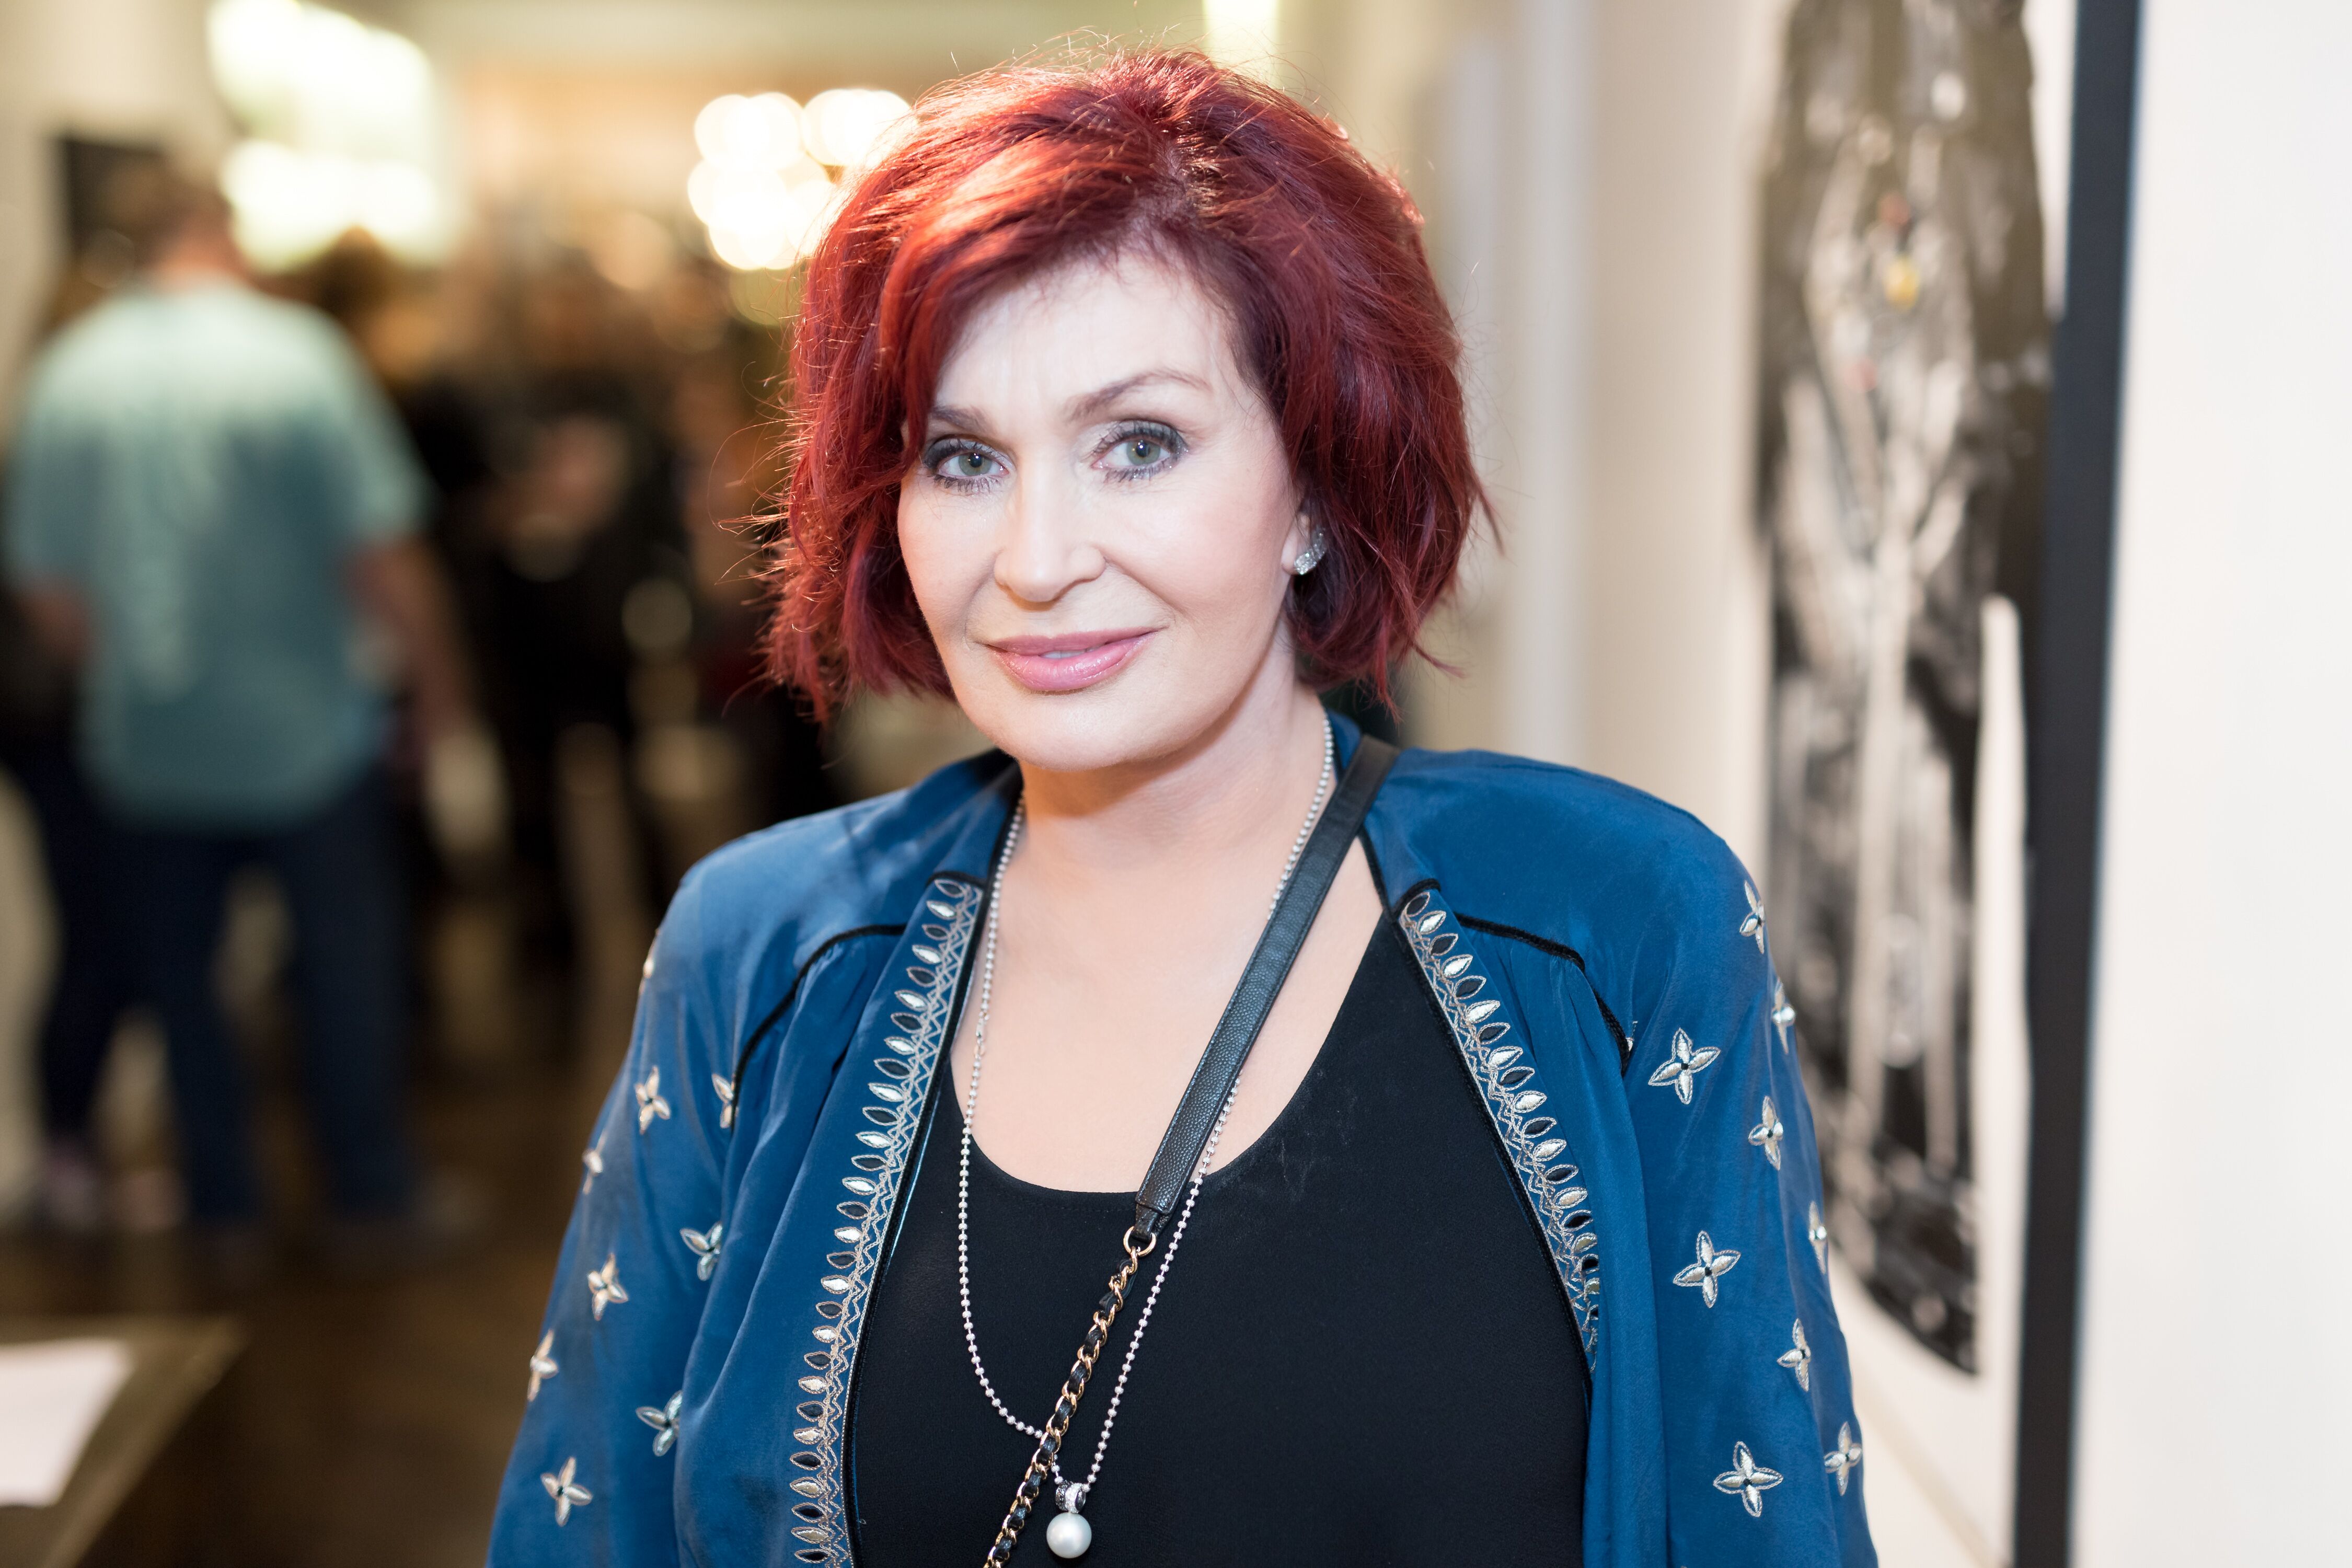  Sharon Osbourne attends the Billy Morrison - Aude Somnia Solo Exhibition at Elisabeth Weinstock on September 28, 2017 in Los Angeles, California | Photo: Getty Images